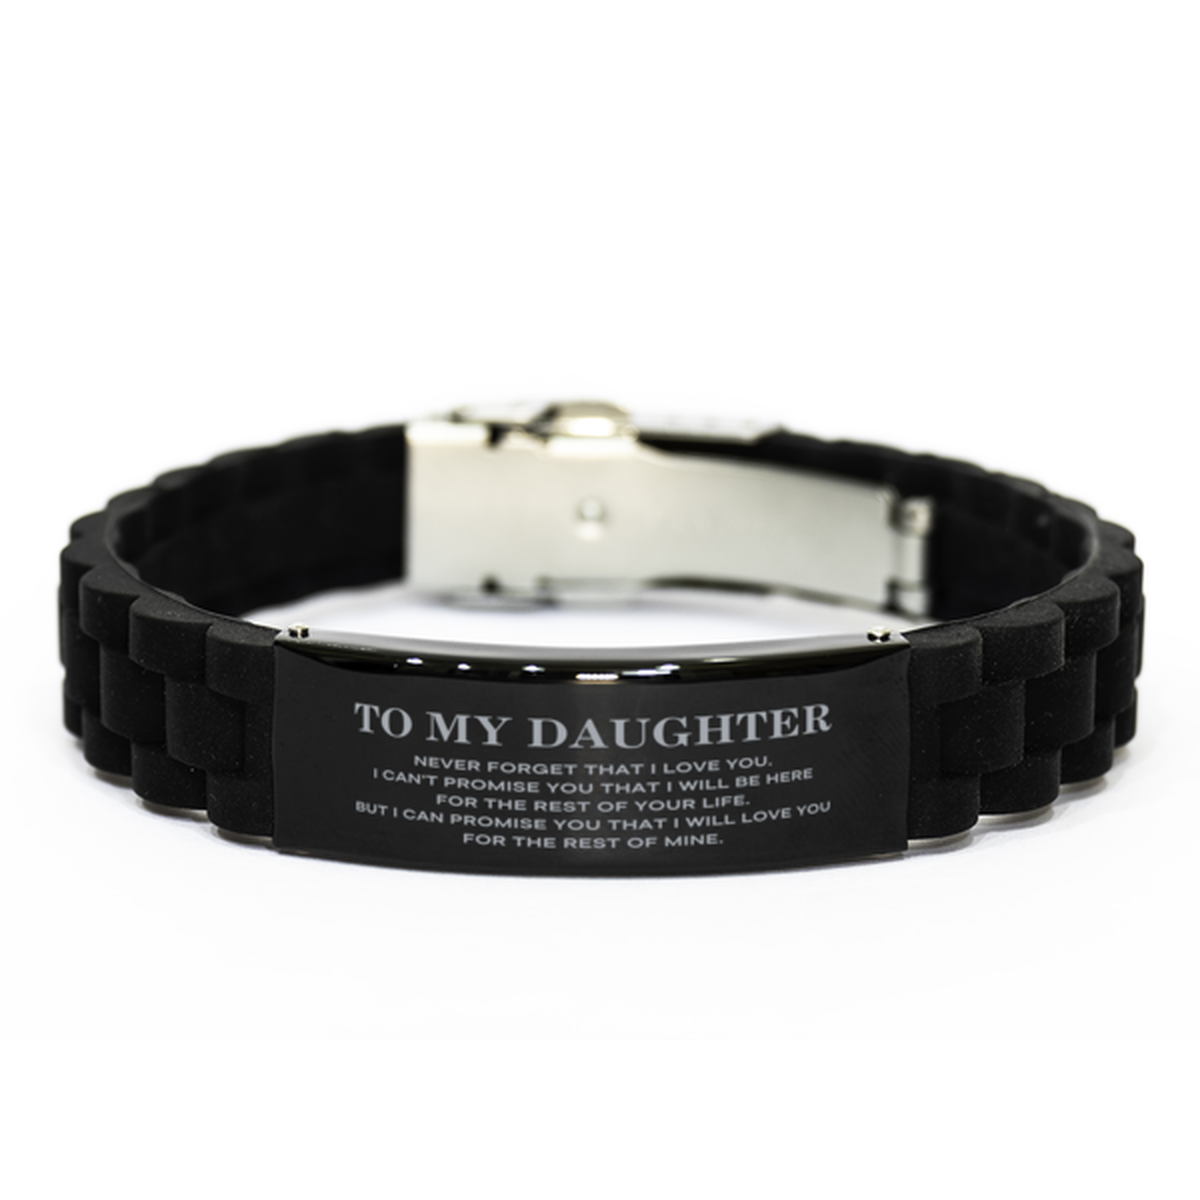 To My Daughter Gifts, I will love you for the rest of mine, Love Daughter Bracelet, Birthday Christmas Unique Black Glidelock Clasp Bracelet For Daughter